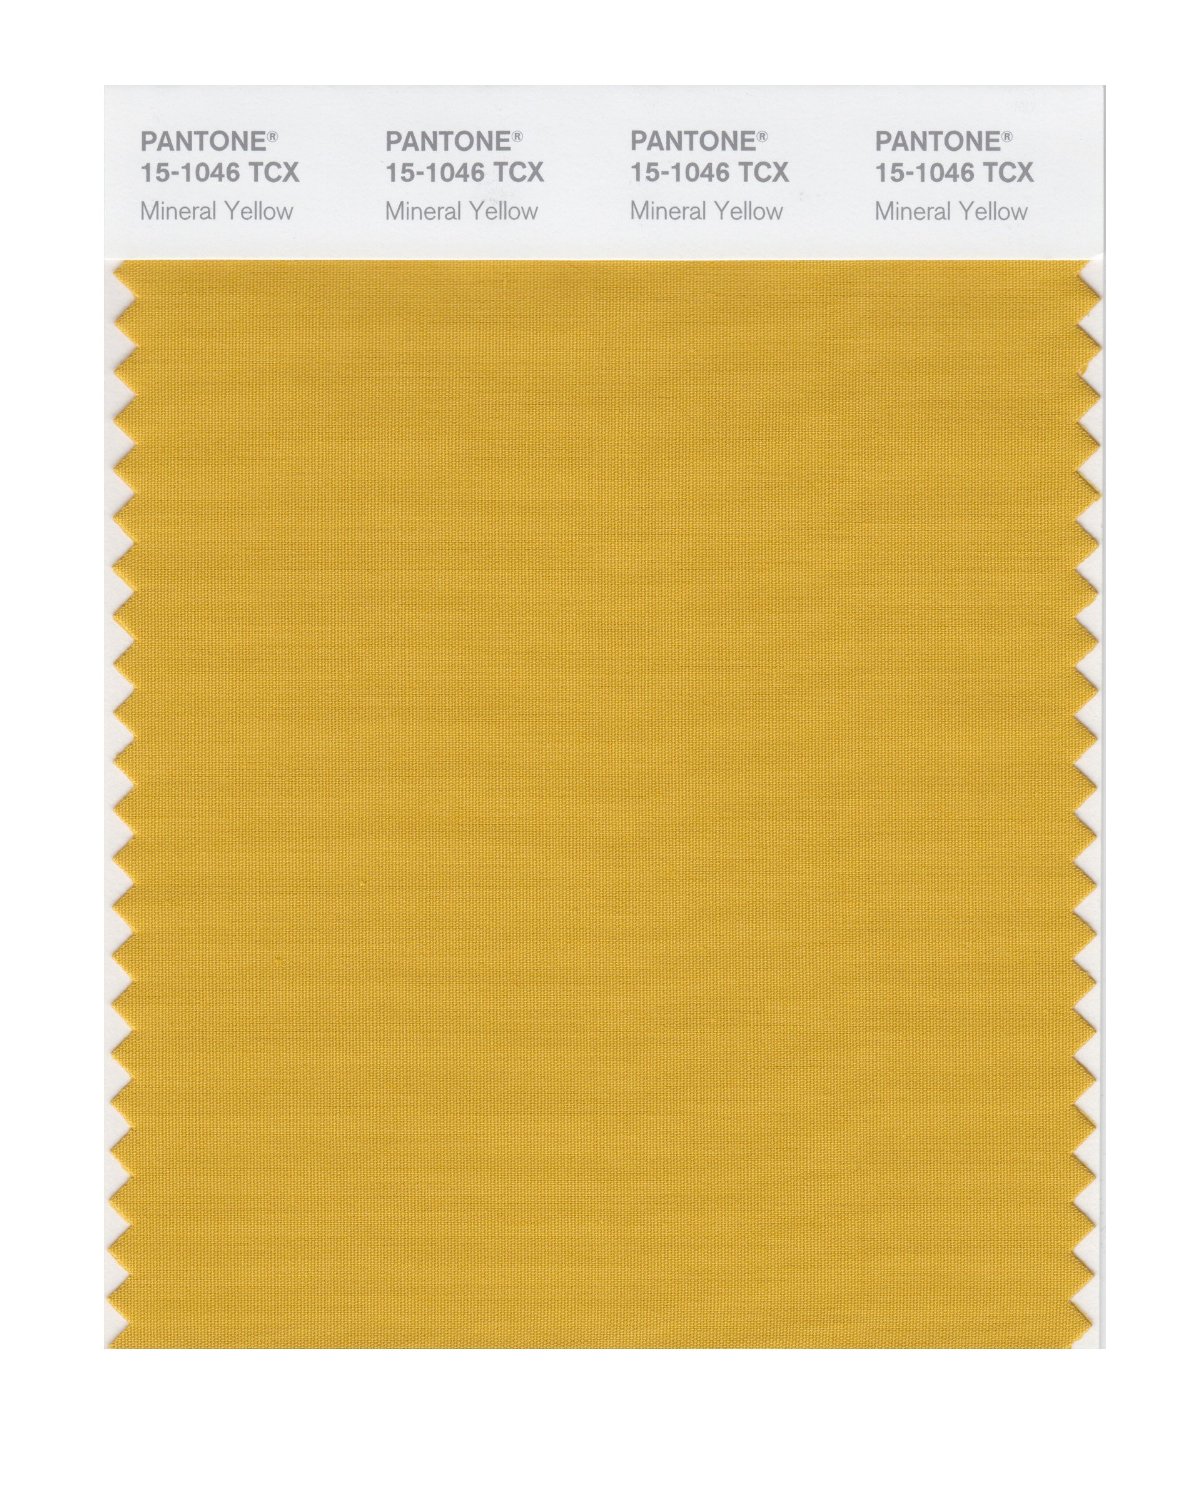 Pantone Cotton Swatch 15-1046 Mineral Yellow